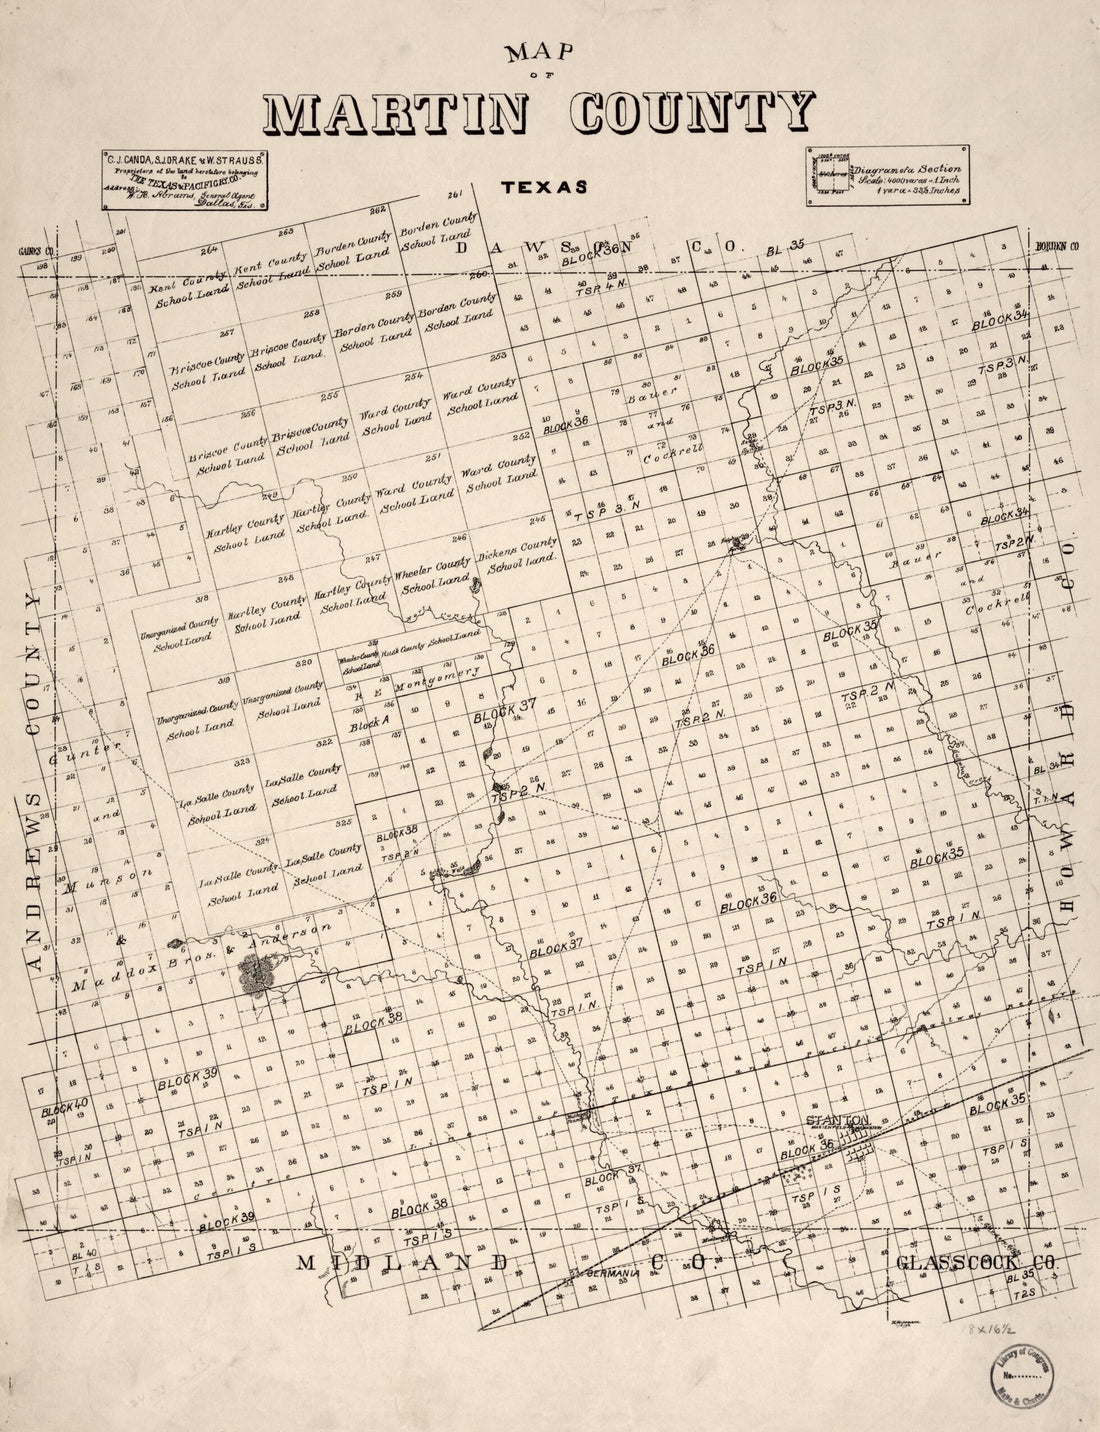 This old map of Map of Martin County, Texas from 1894 was created by M. Stakemann in 1894